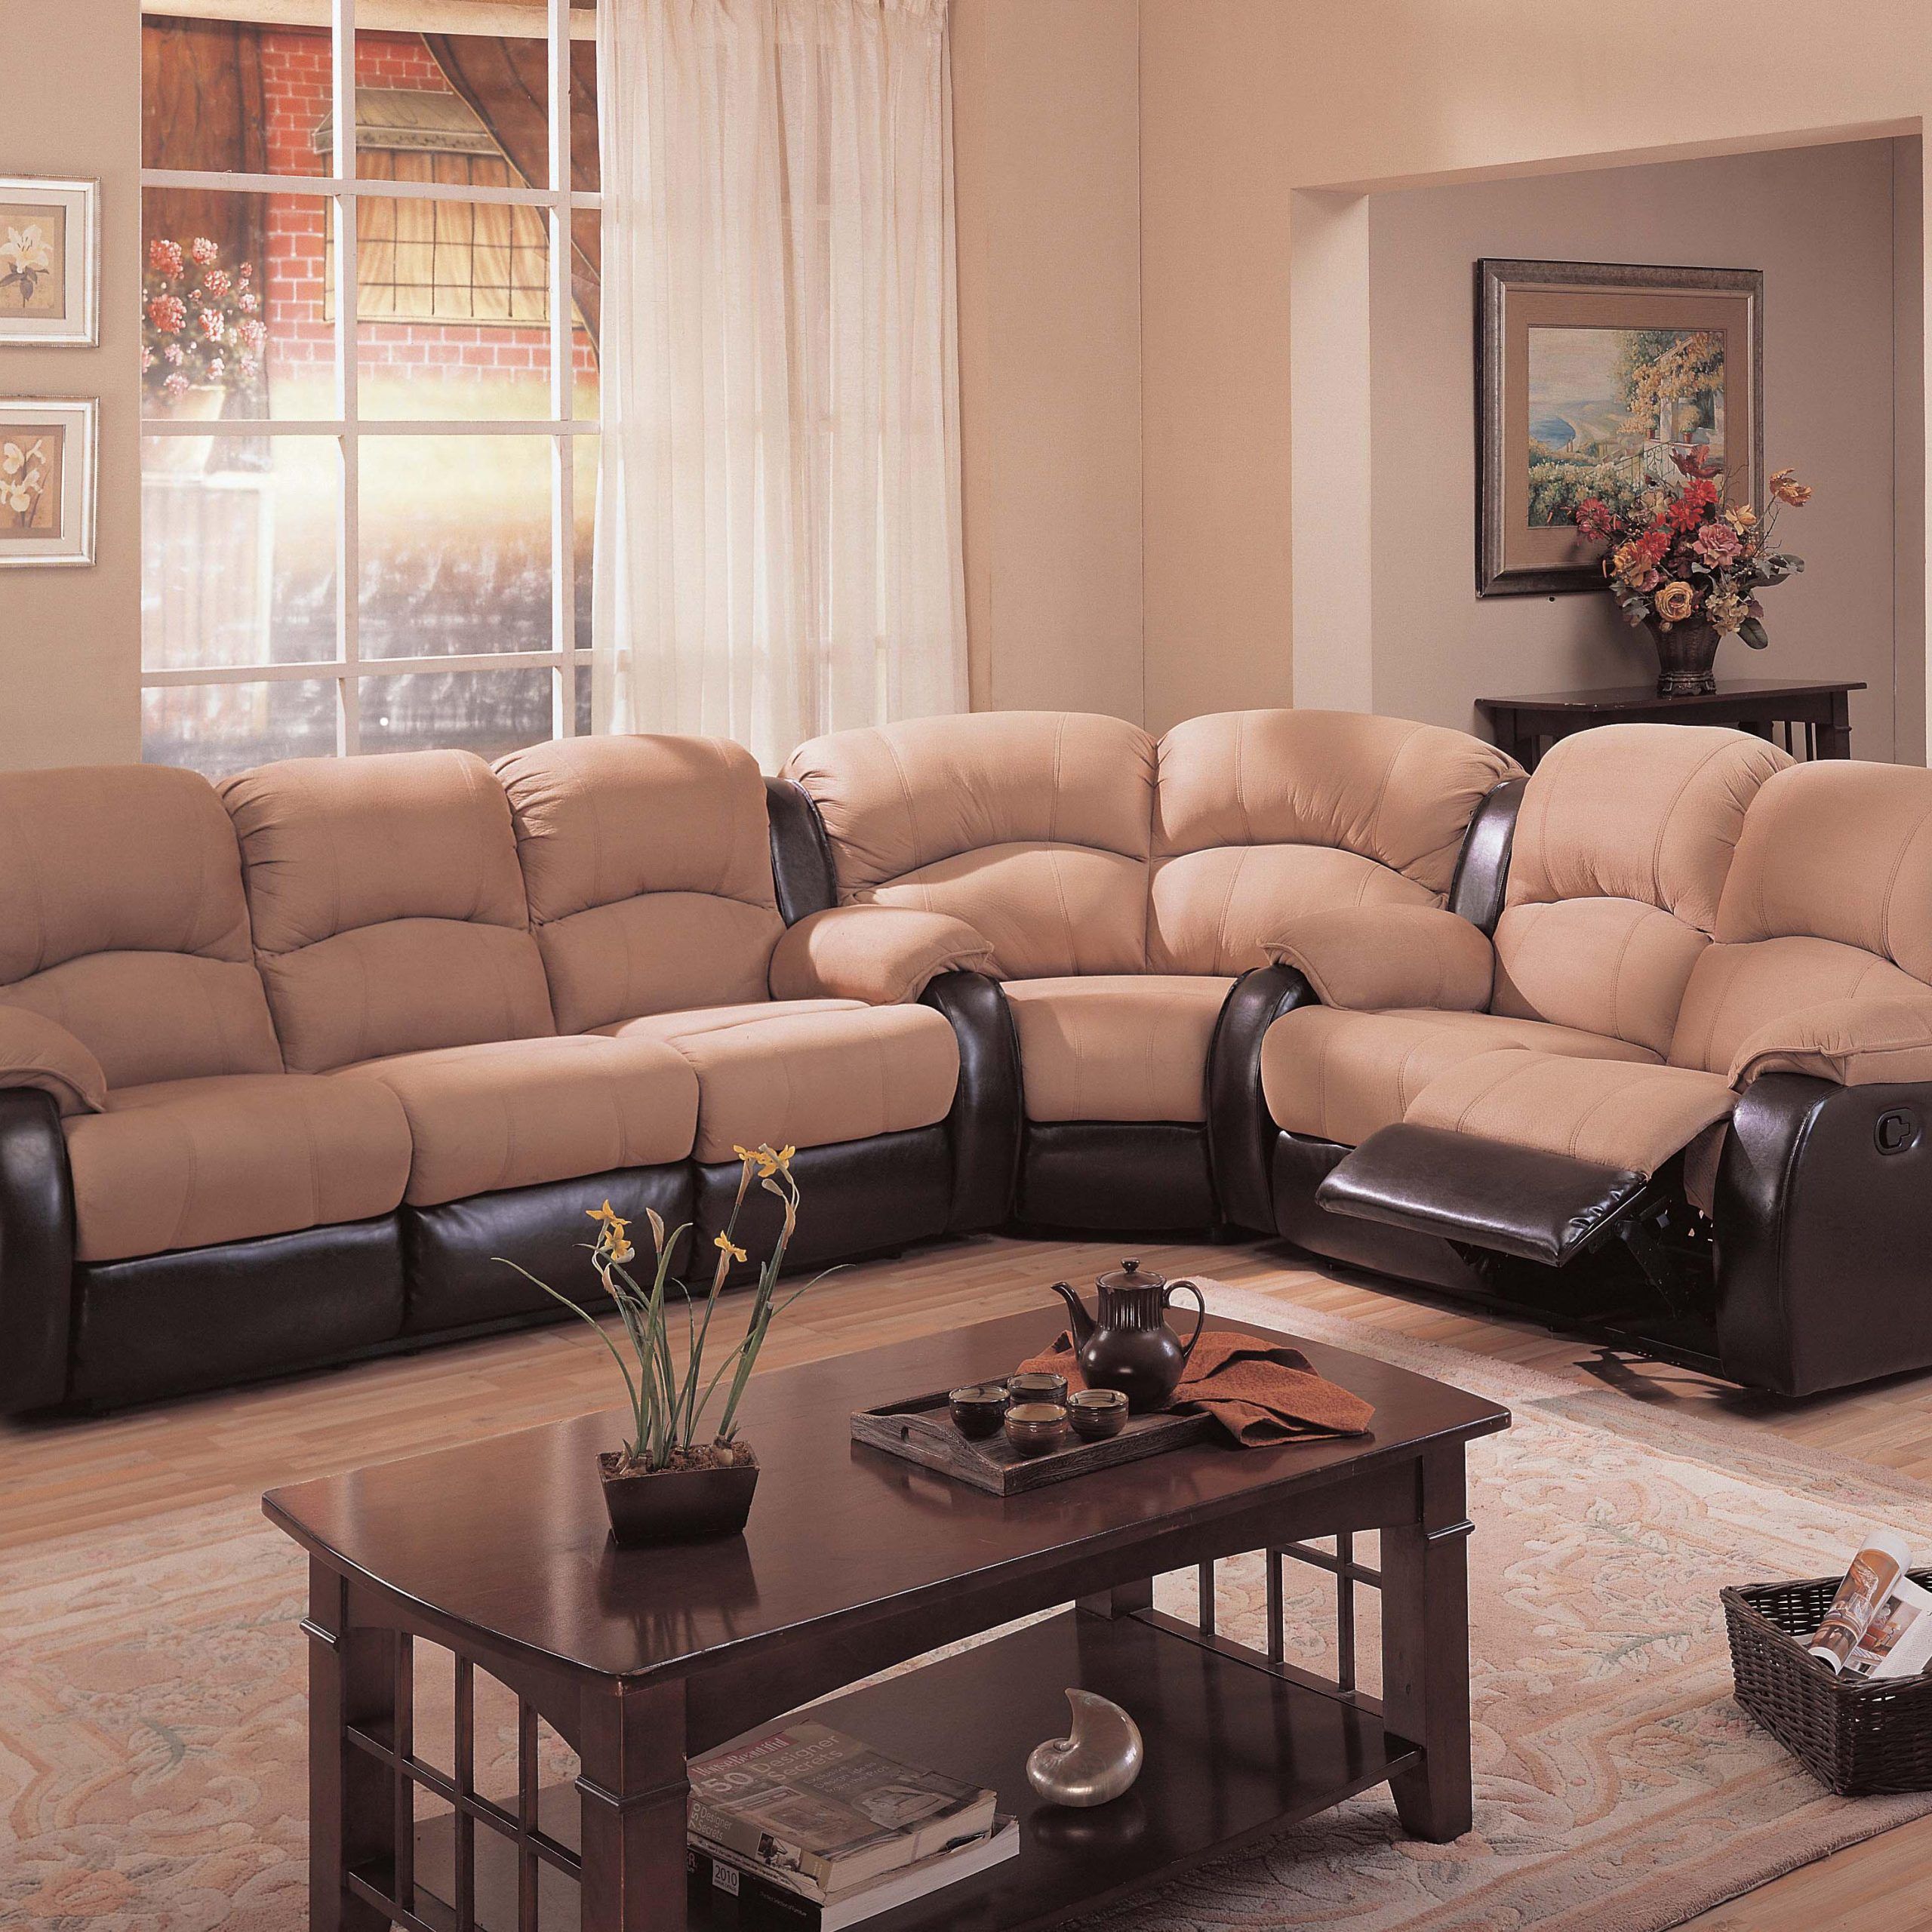 Microfiber Sectional Couch With Recliner: Chic Features For Your Home Regarding Microfiber Sectional Corner Sofas (View 2 of 20)